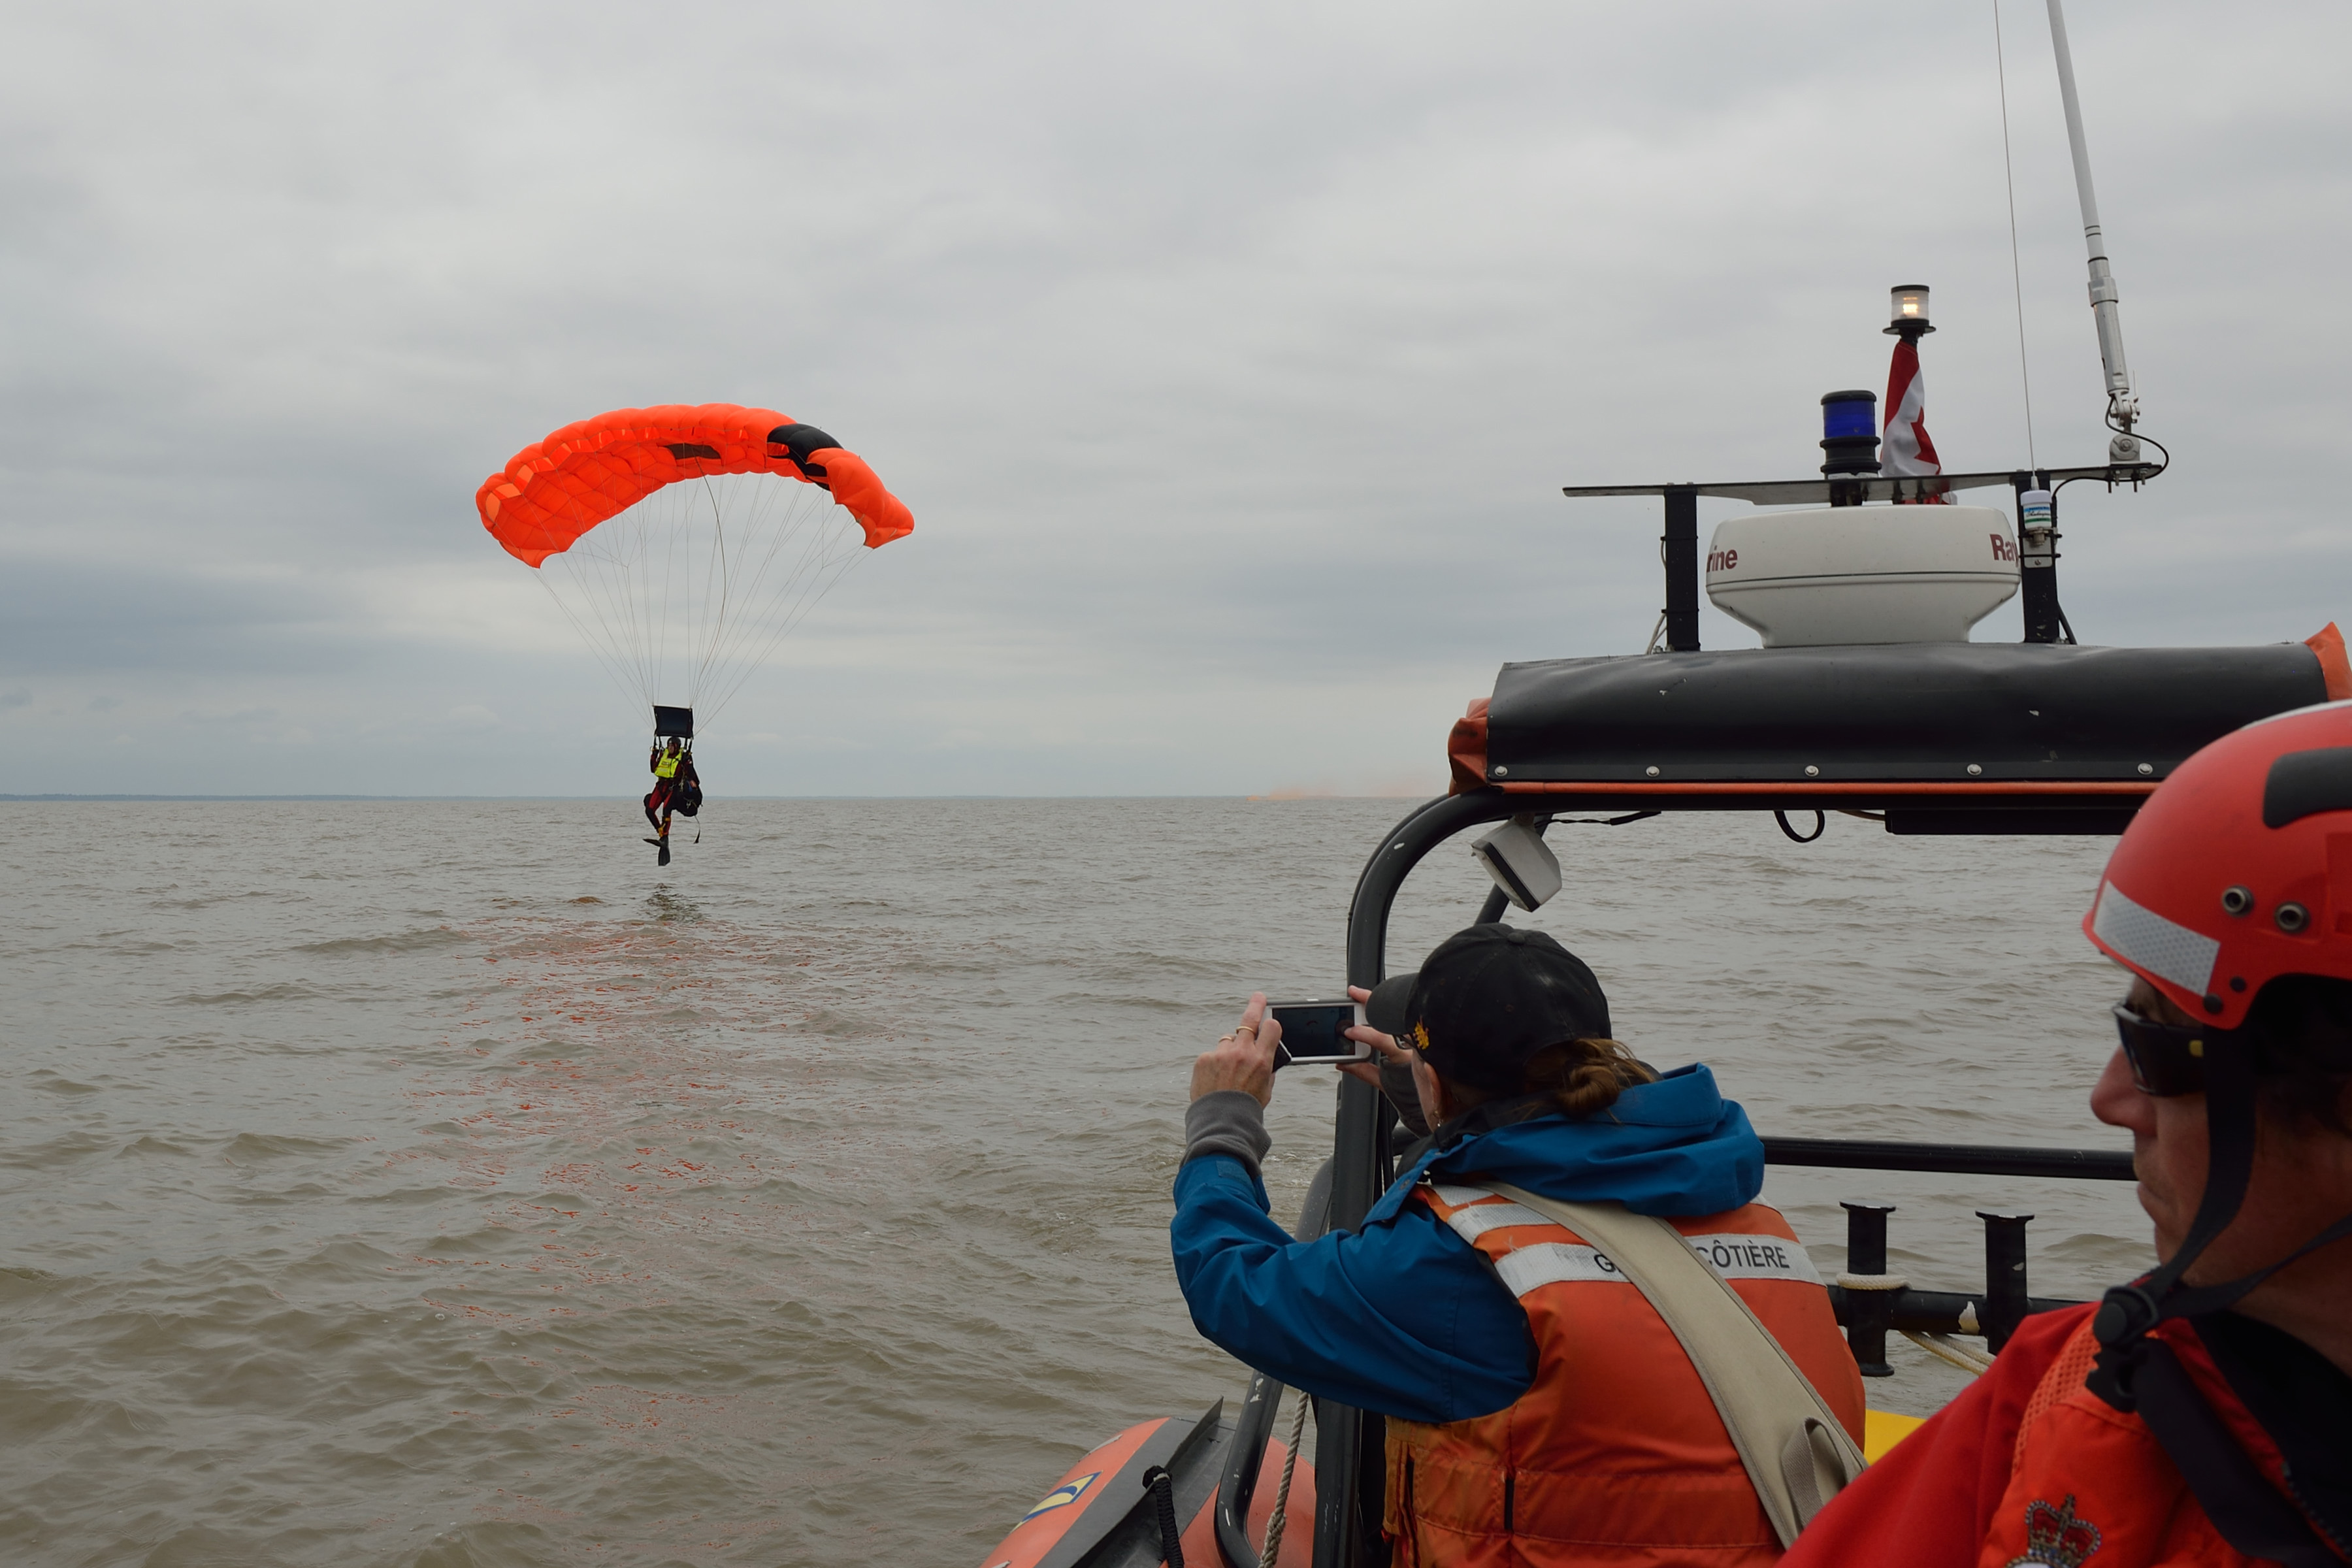 While spectators in a Canadian Coast Guard rigid hulled inflatable boat watch, Master Corporal Kent Stanway, a SAR Tech from 14 Wing Greenwood, N.S., jumps into Lake Winnipeg during the National SAREX 2013. PHOTO: Sergeant Bill McLeod